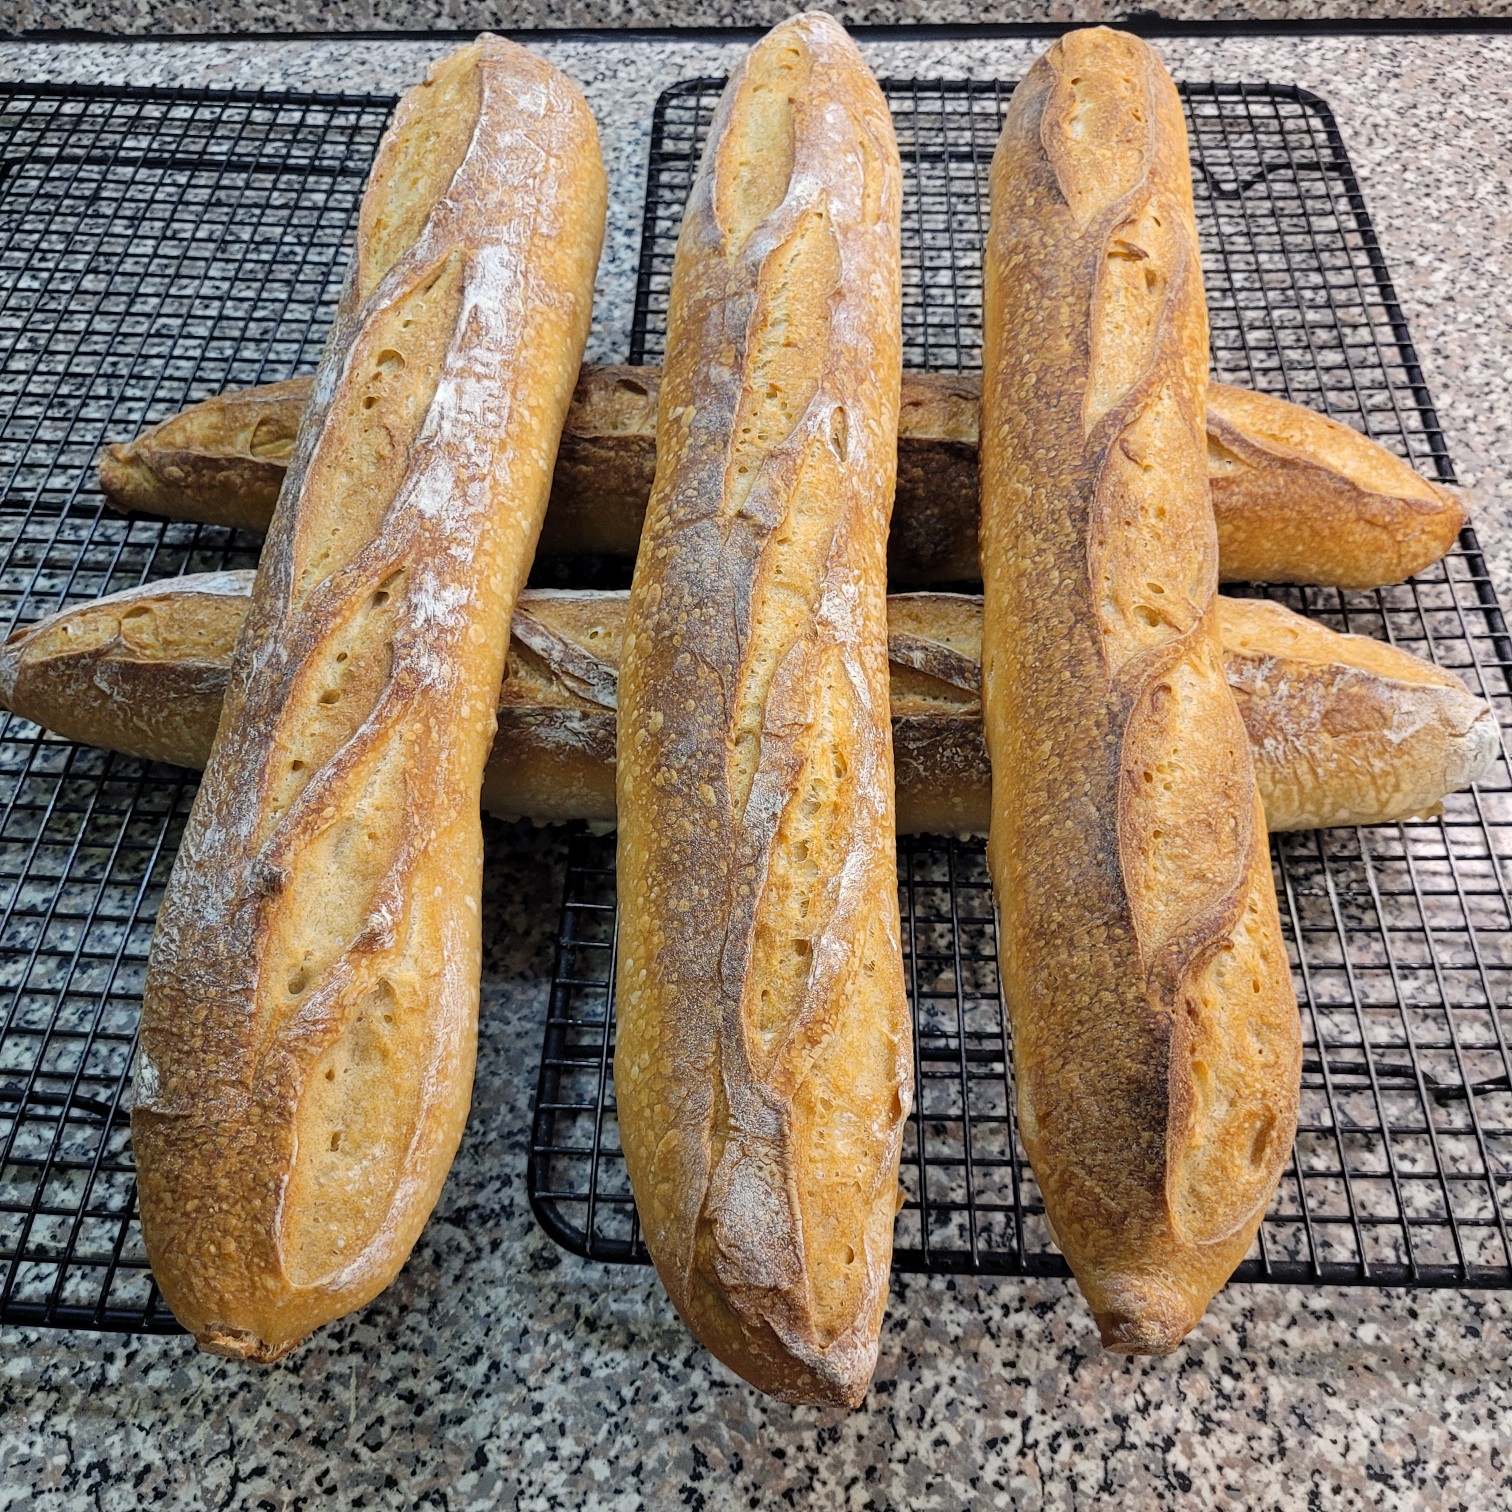 Now for something completely different -  Commercial yeast baguettes